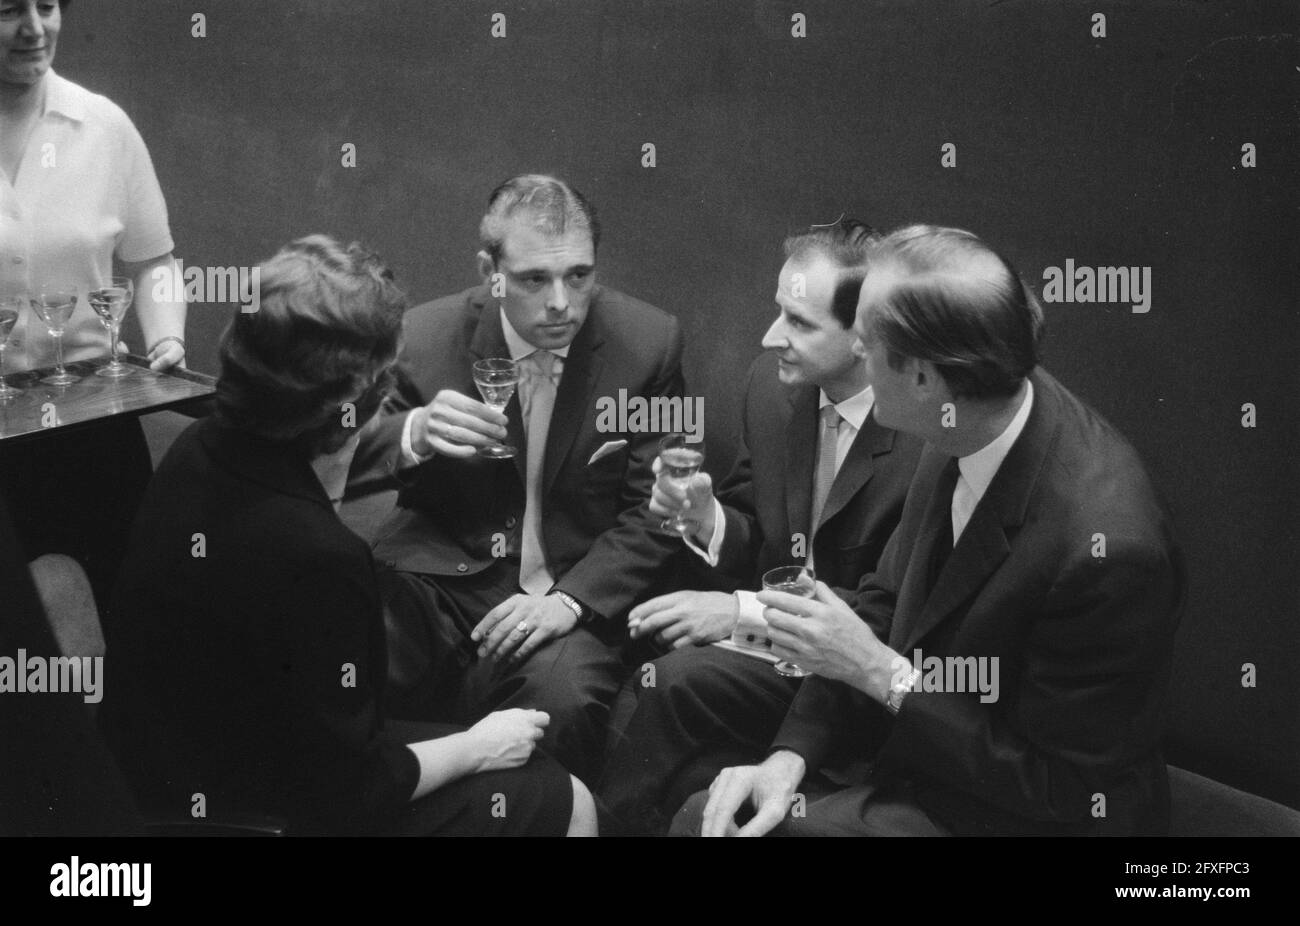 Prince Bernhard Fund television award presented to Milo Anstadt, from left to right [unknown], Piet te Nuyl, Milo Anstadt and Eric de Vries, October 6, 1960, television awards, presentations, The Netherlands, 20th century press agency photo, news to remember, documentary, historic photography 1945-1990, visual stories, human history of the Twentieth Century, capturing moments in time Stock Photo